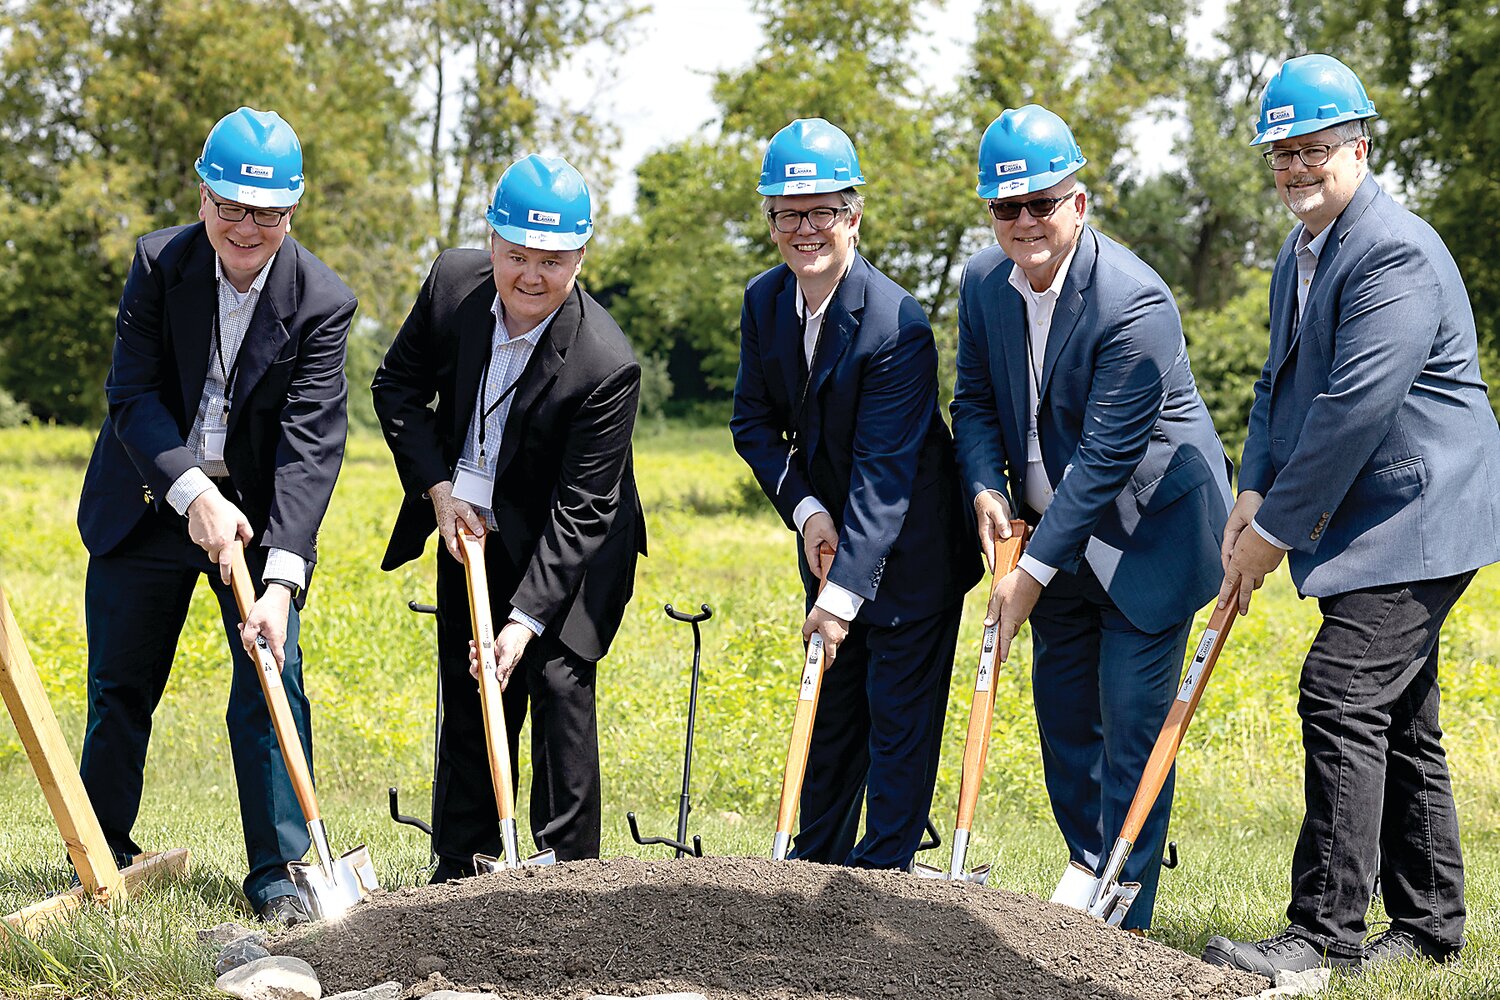 At the groundbreaking for Gelest, Inc.’s latest production facility are, from left, Neville Lockwood, senior vice president, operations, Gelest; Edward Kimble, executive vice president, Gelest; Dr. Jonathan Goff, Gelest president; John Duncan, vice president and director of operations for Barr & Barr; and Thomas Scally, senior director, architecture at PS&S.